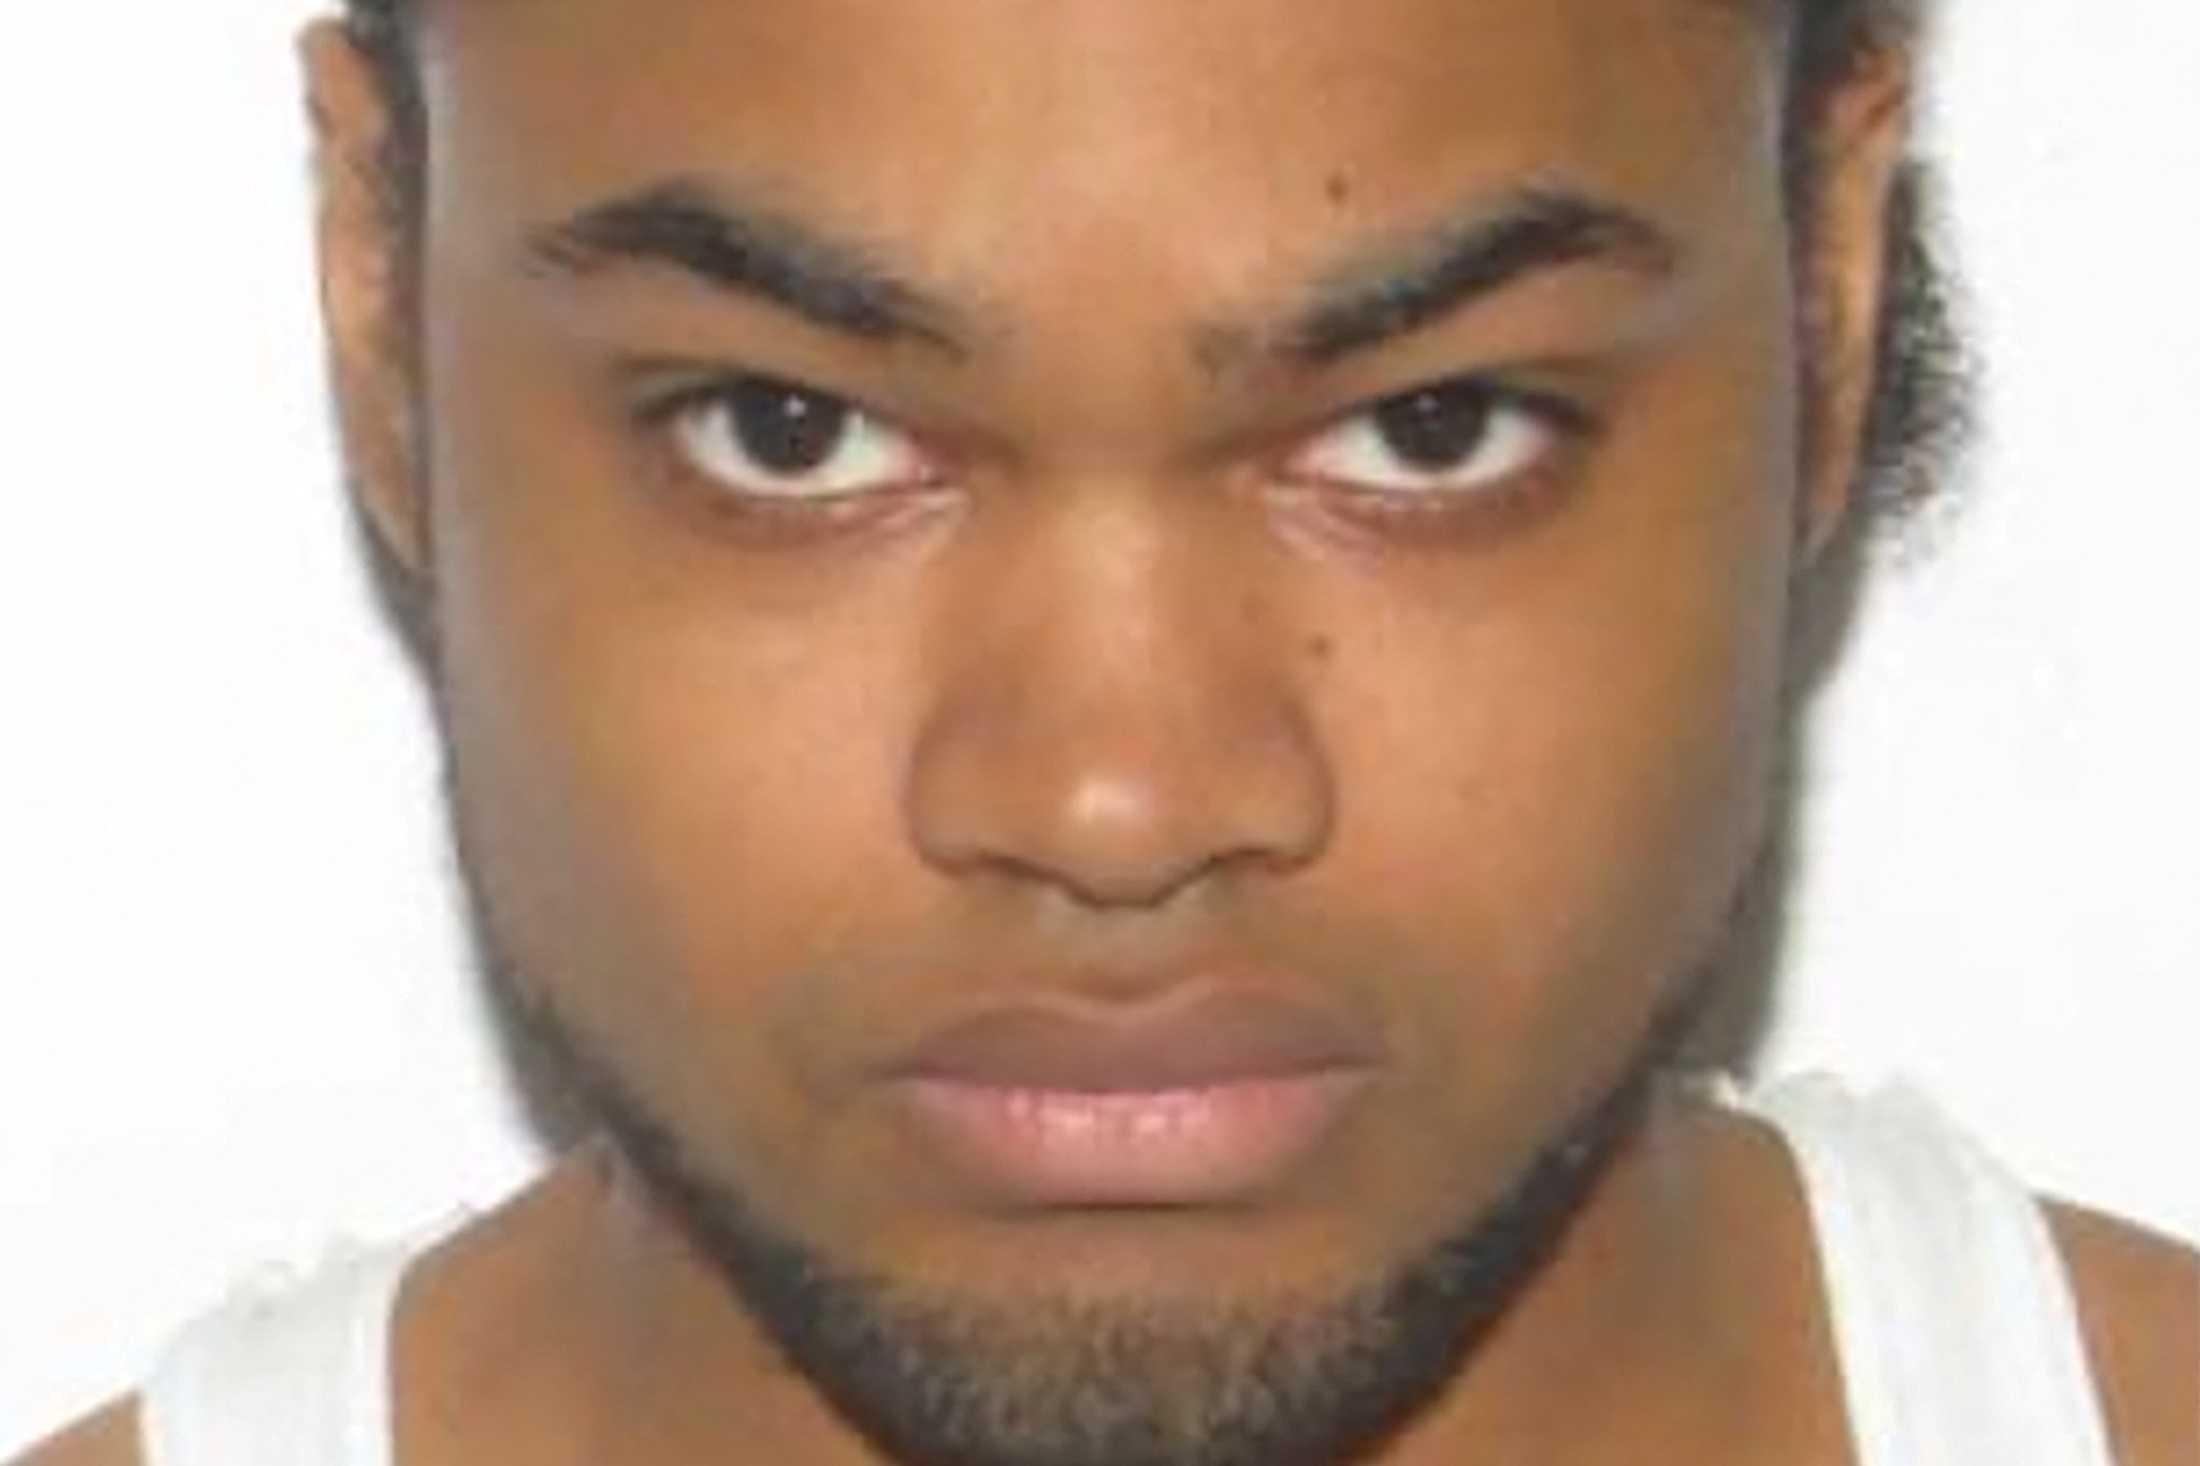 Andre Bing, the suspect in the deadly shooting of fellow employees at a Walmart store in Chesapeake, Virgina, poses in an undated photograph released by Chesapeake Police on Nov 23. Photo: Reuters